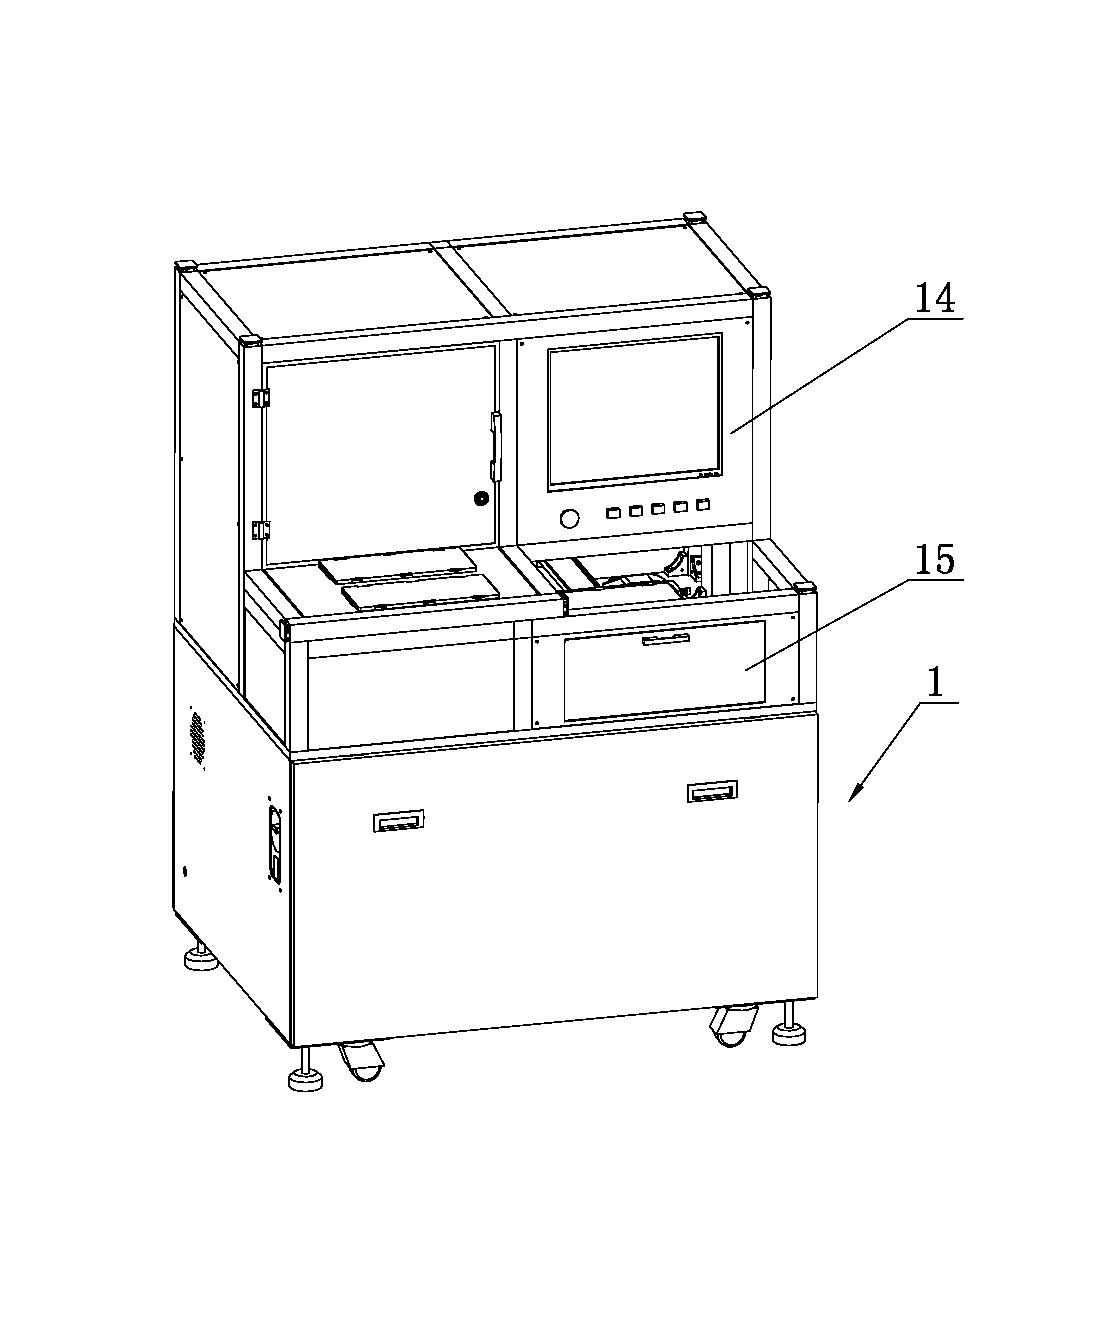 Vision inspection device for convenient assembly and disassembly of tray